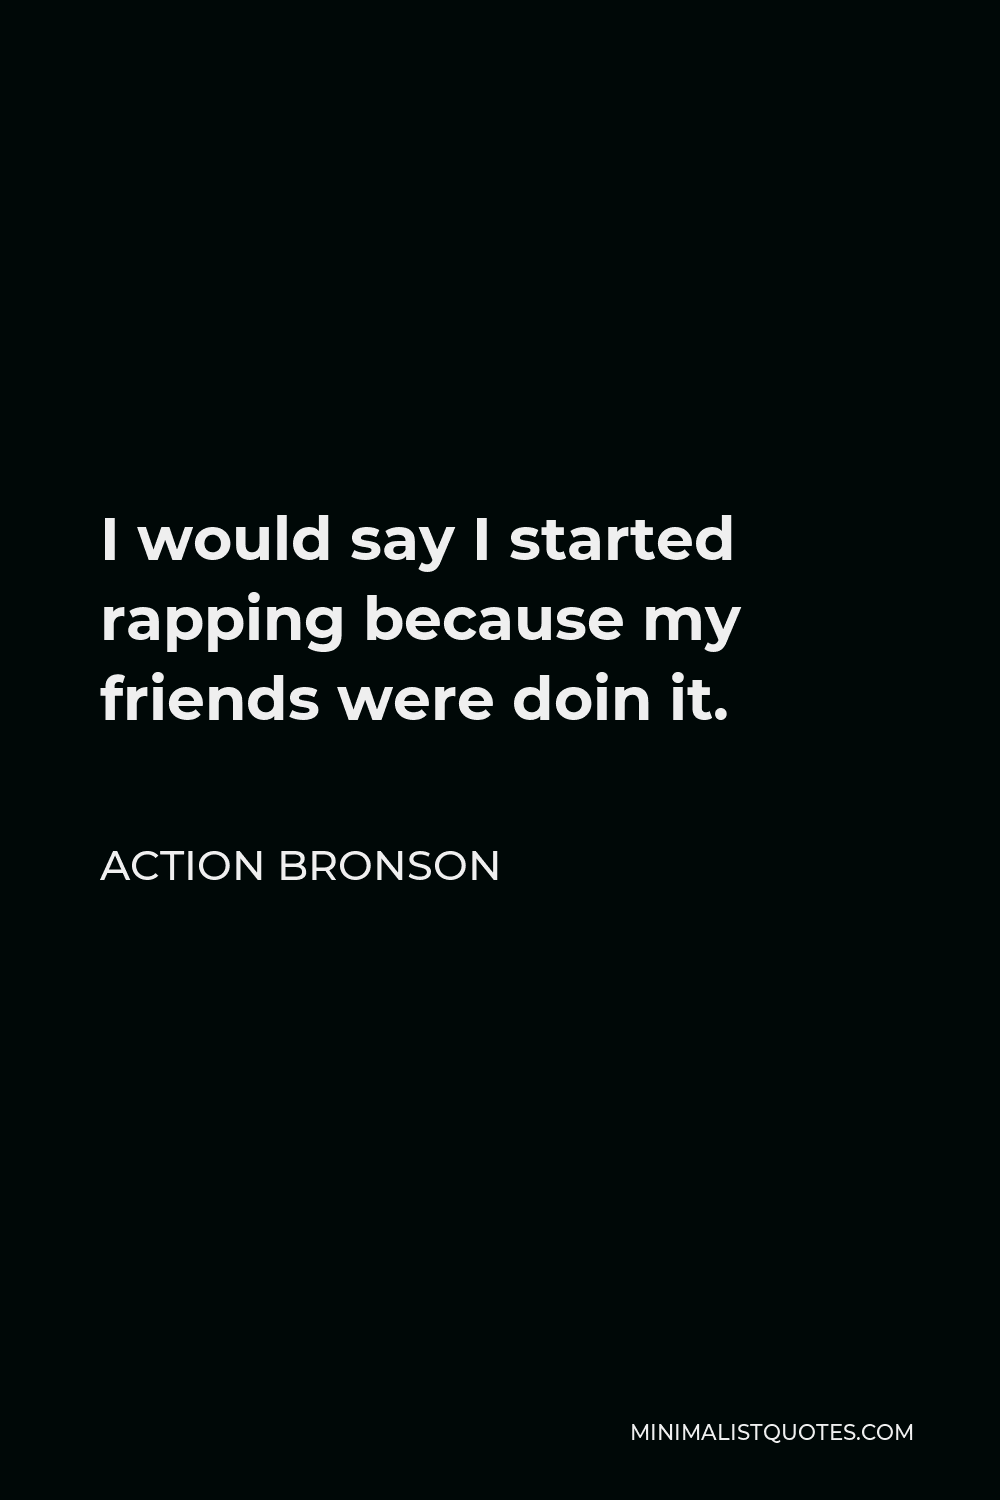 Action Bronson Quote - I would say I started rapping because my friends were doin it.